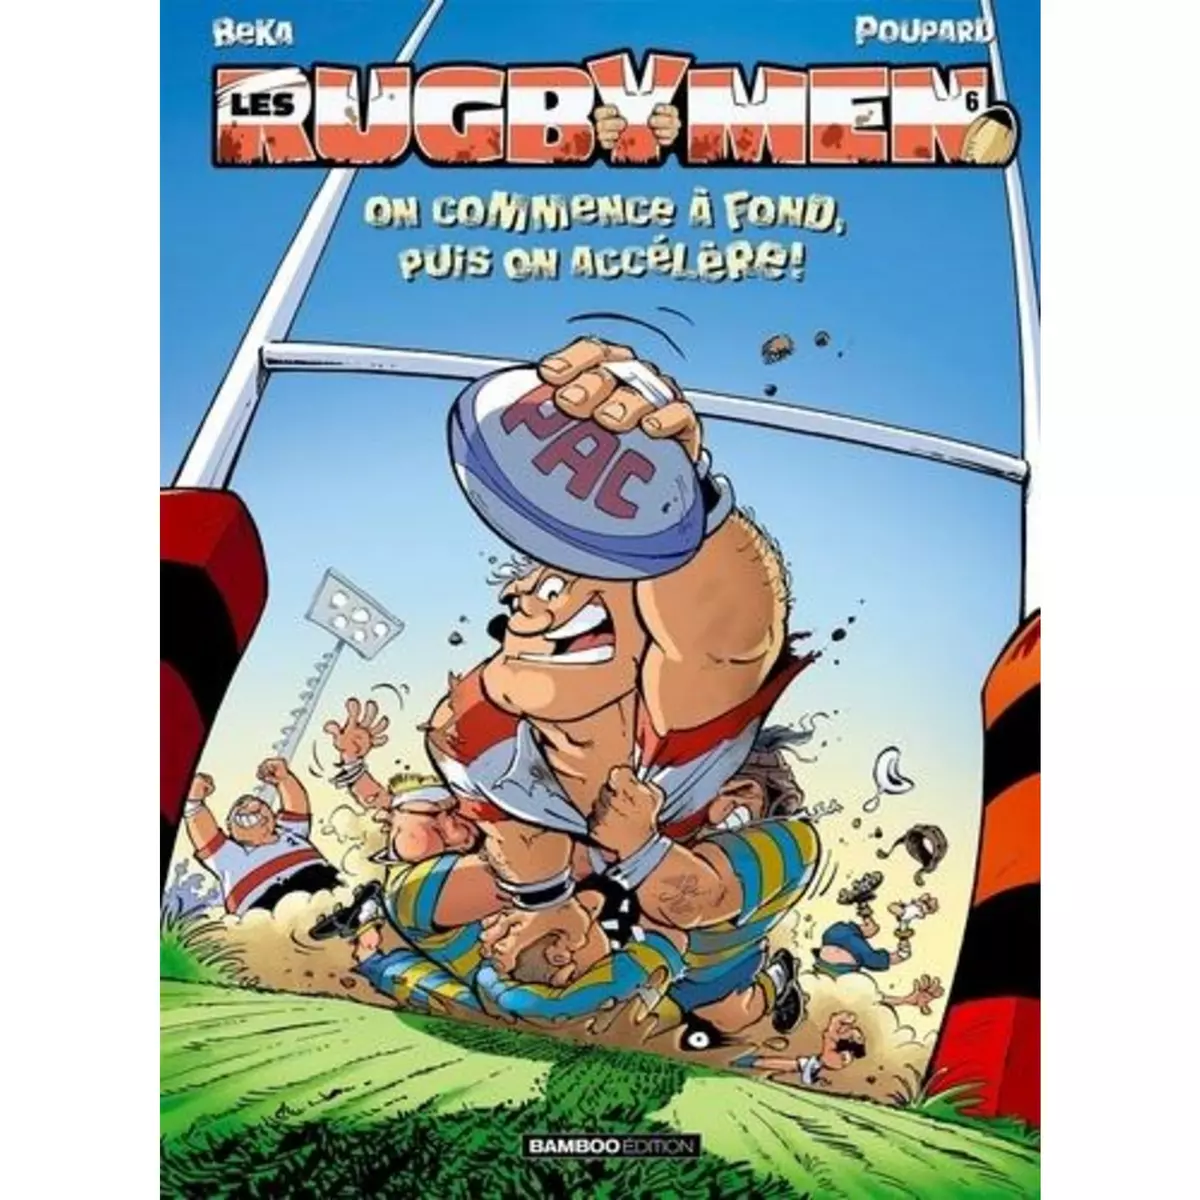  LES RUGBYMEN TOME 6 : ON COMMENCE A FOND, PUIS ON ACCELERE !, BeKa